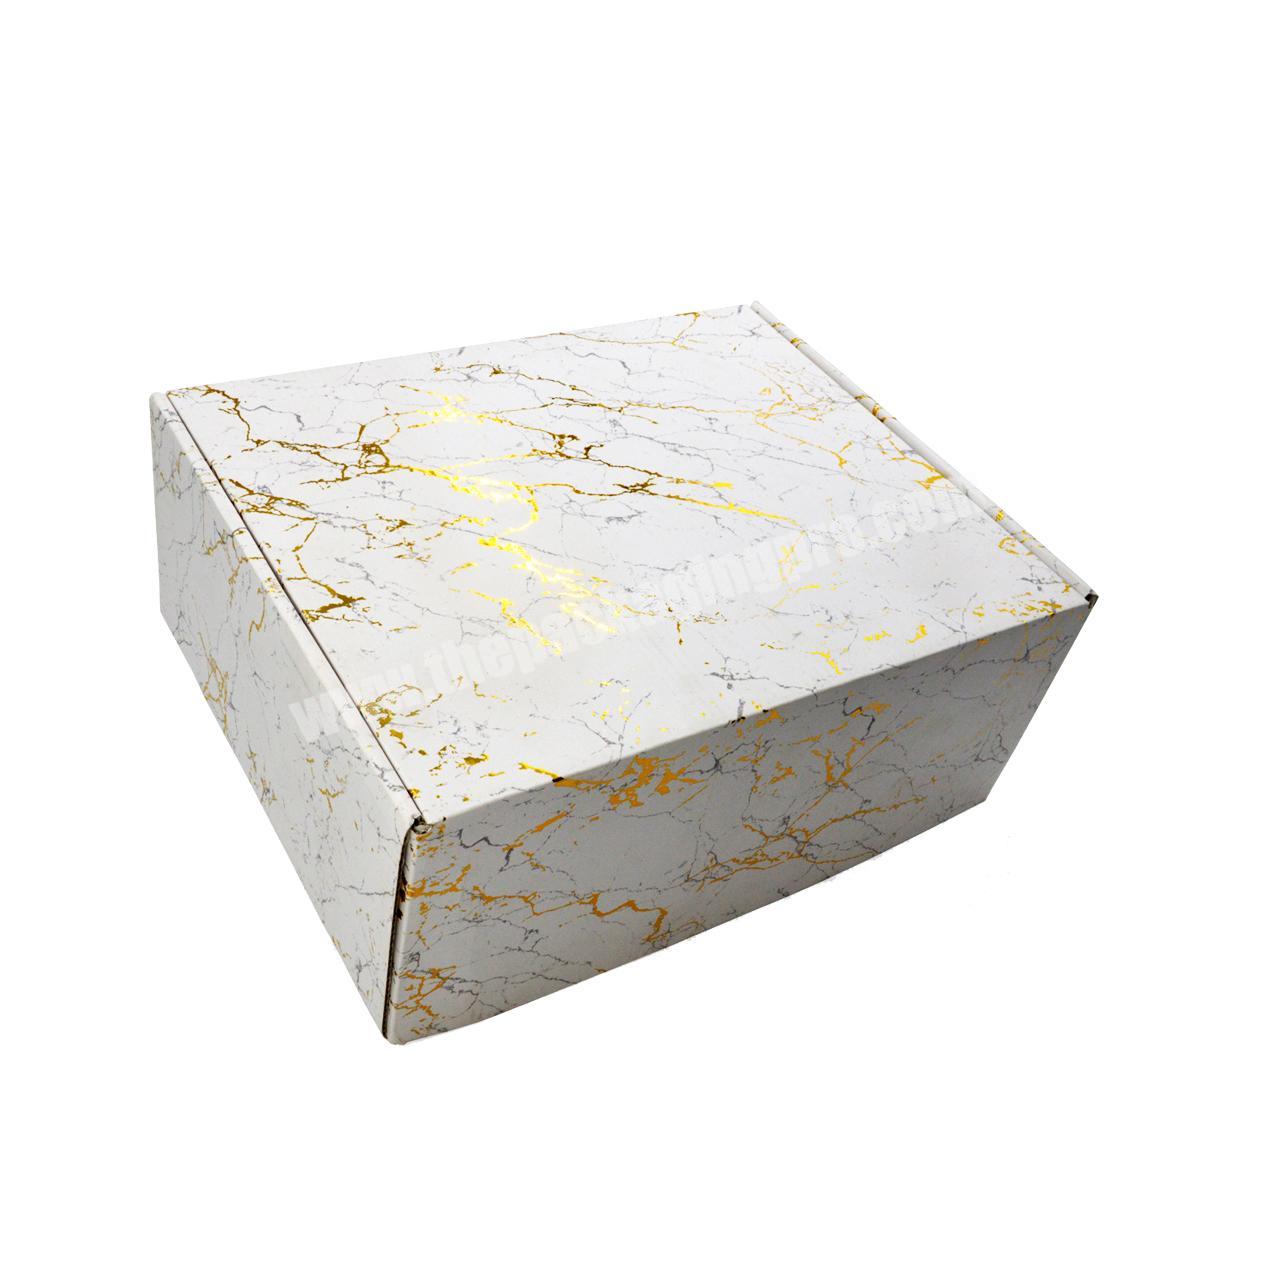 Wholesale Recycled Materials Eco Light Duty Shoe Box Shoes Corrugated Packaging Paper Shipping Boxes